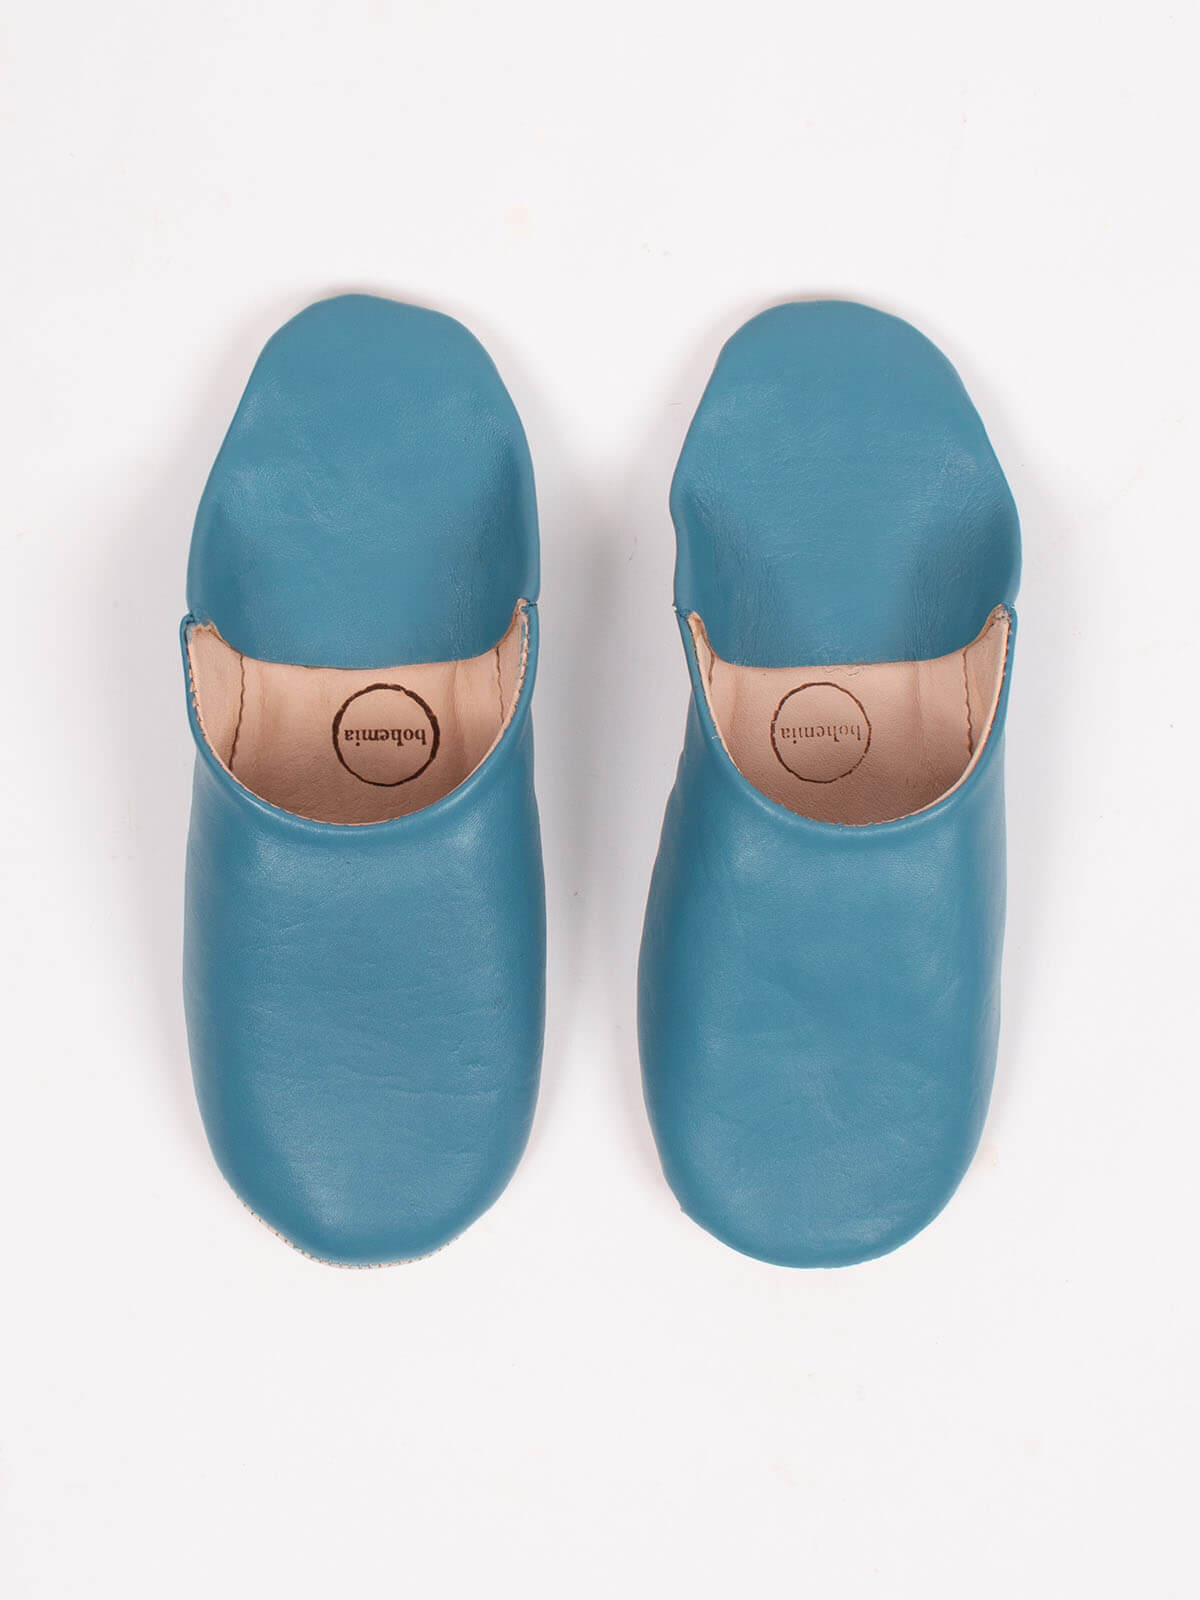 Moroccan Mens Babouche Slippers, Blue Grey